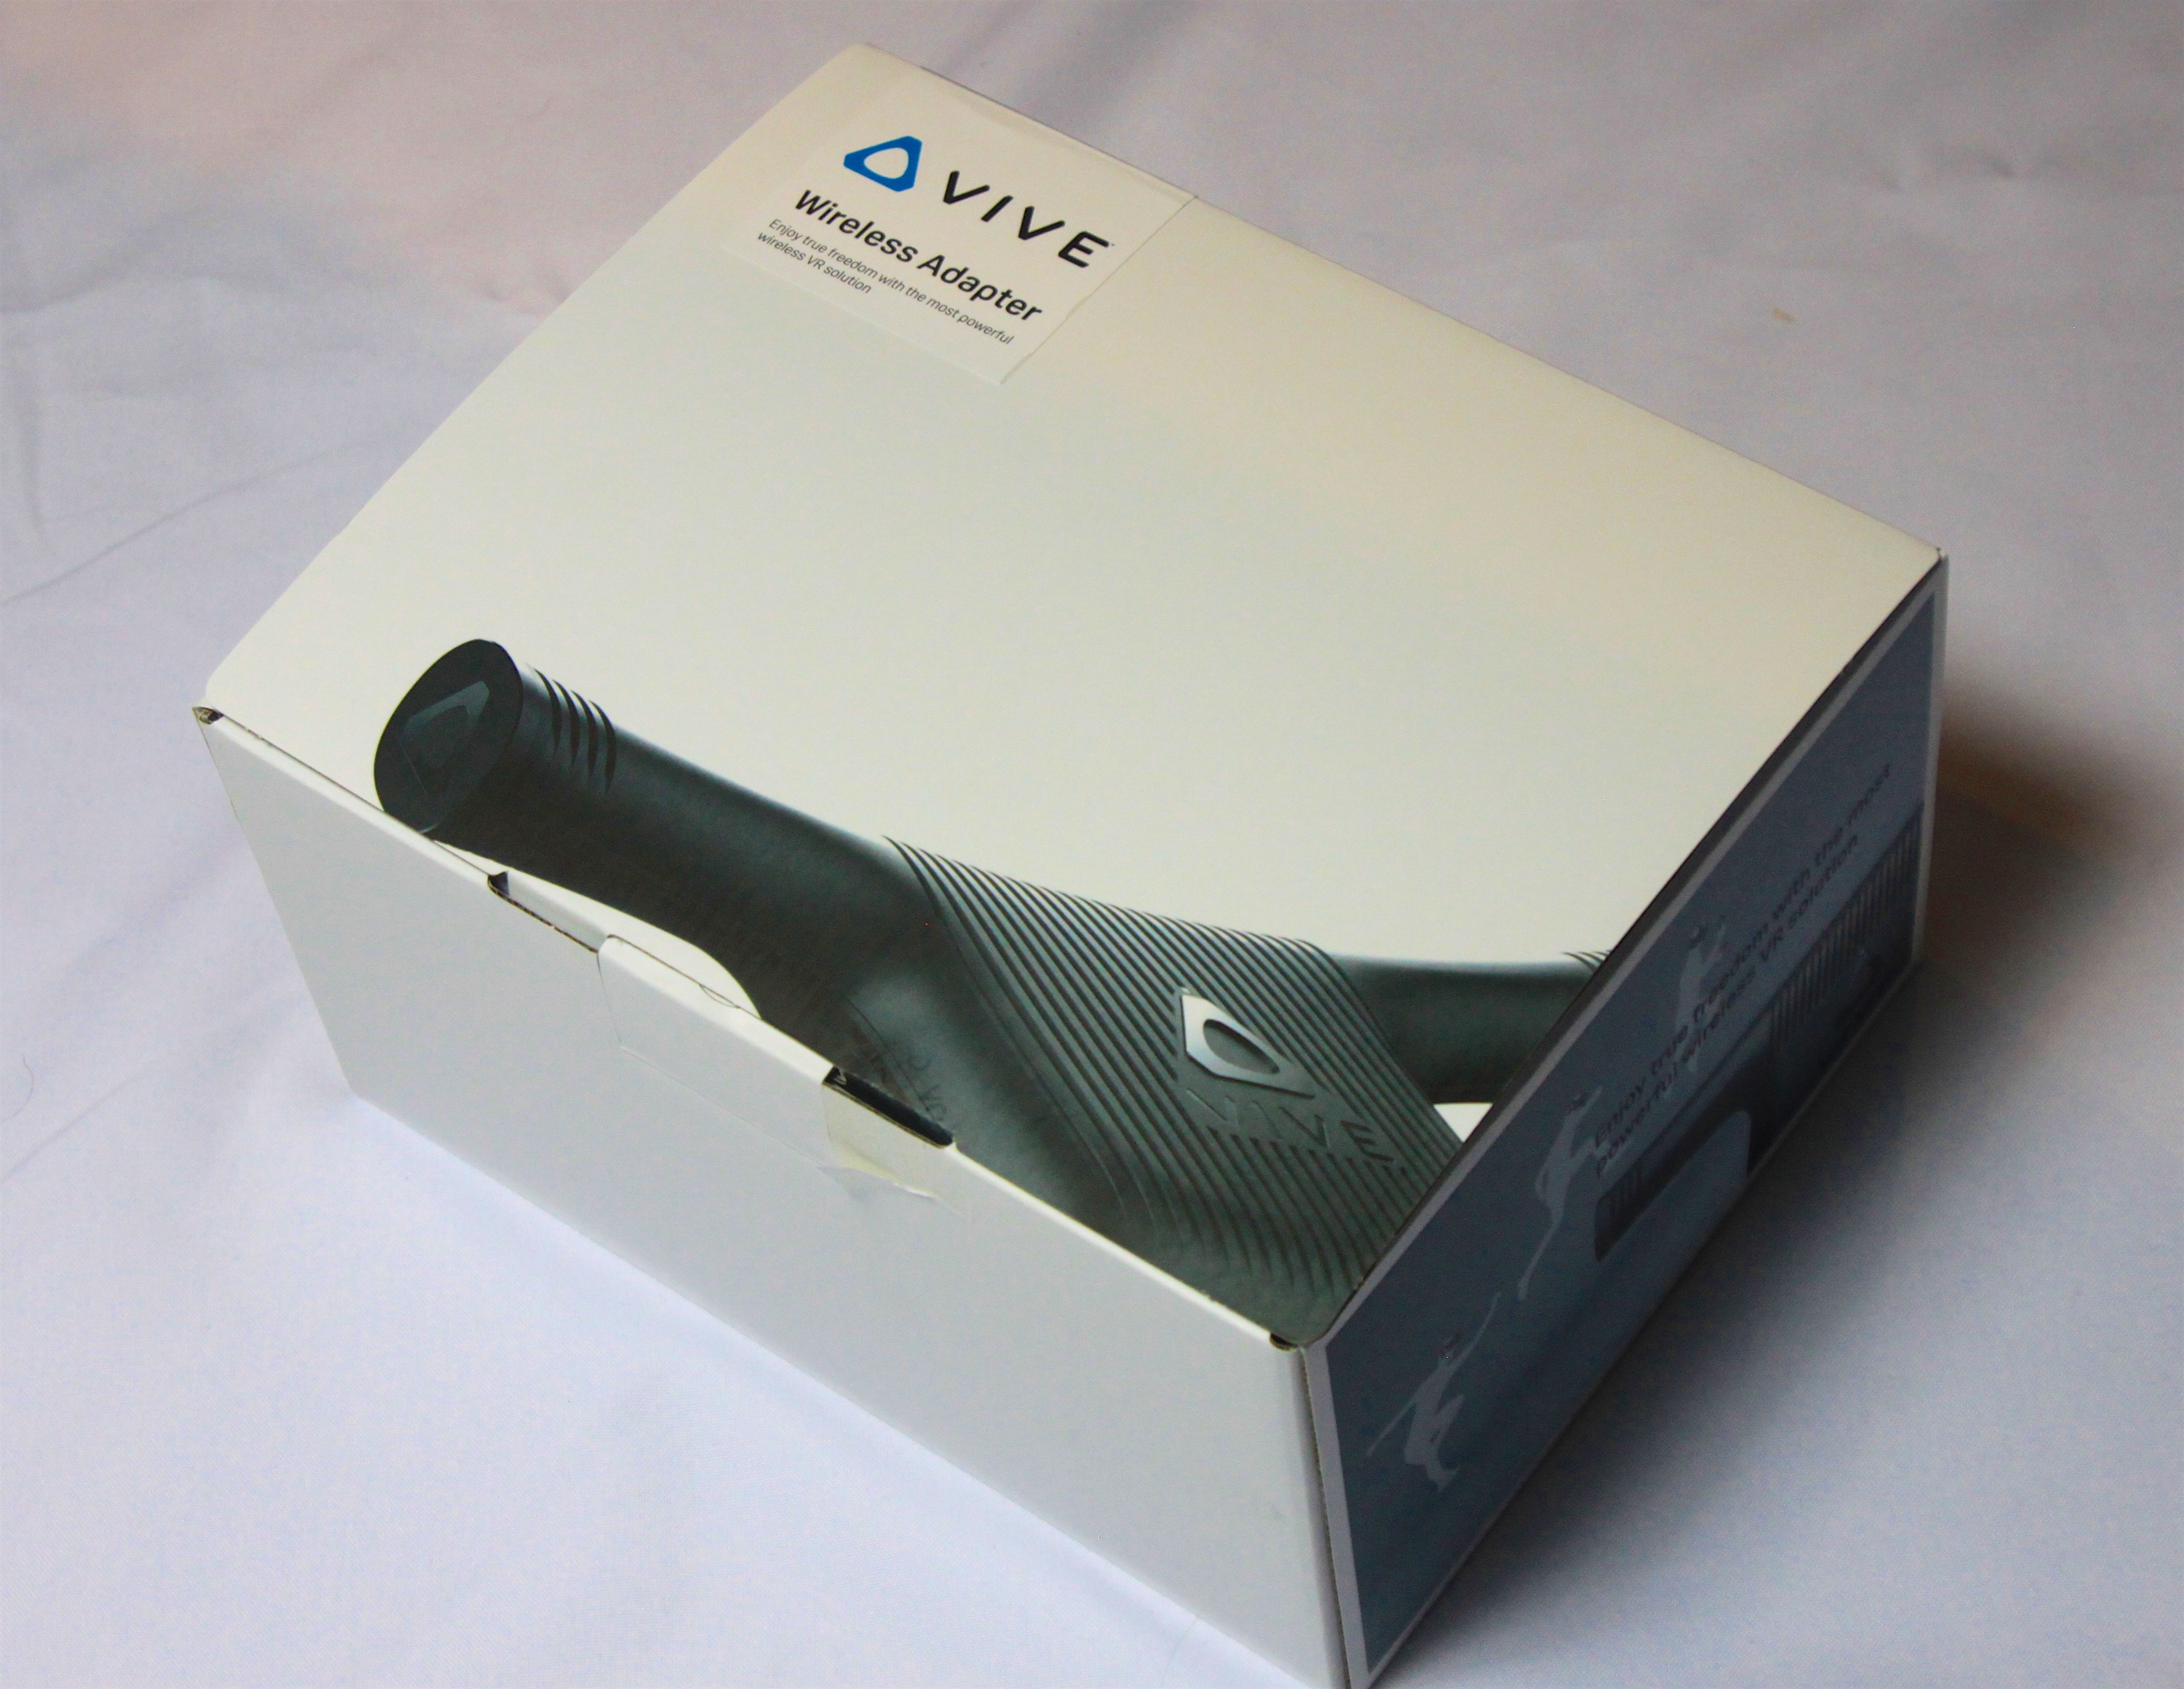 Vive's wireless adapter gives the best VR experience lots of money can buy